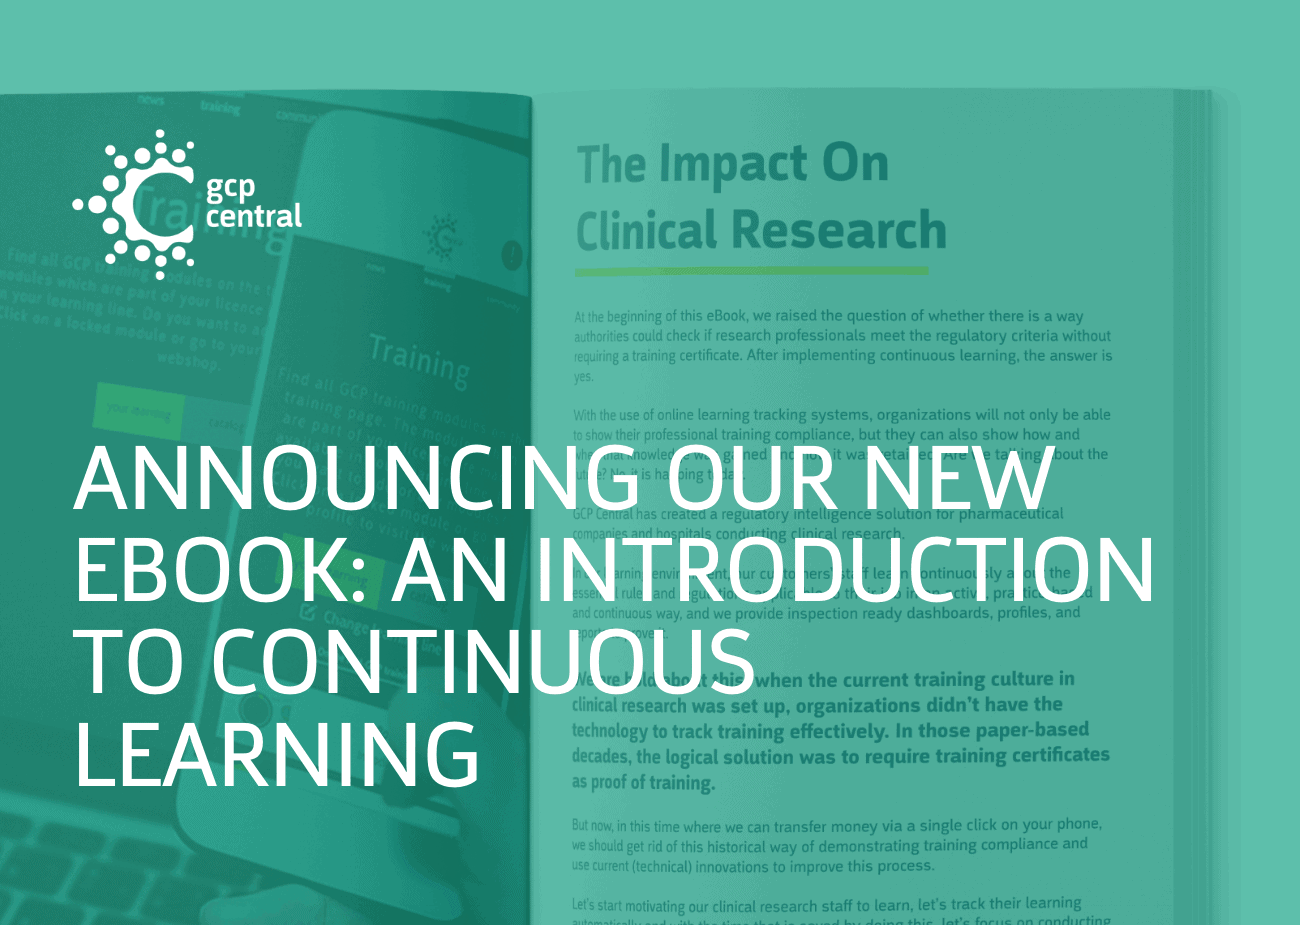 GCP Central's Newest eBook An Introduction to Continuous Learning